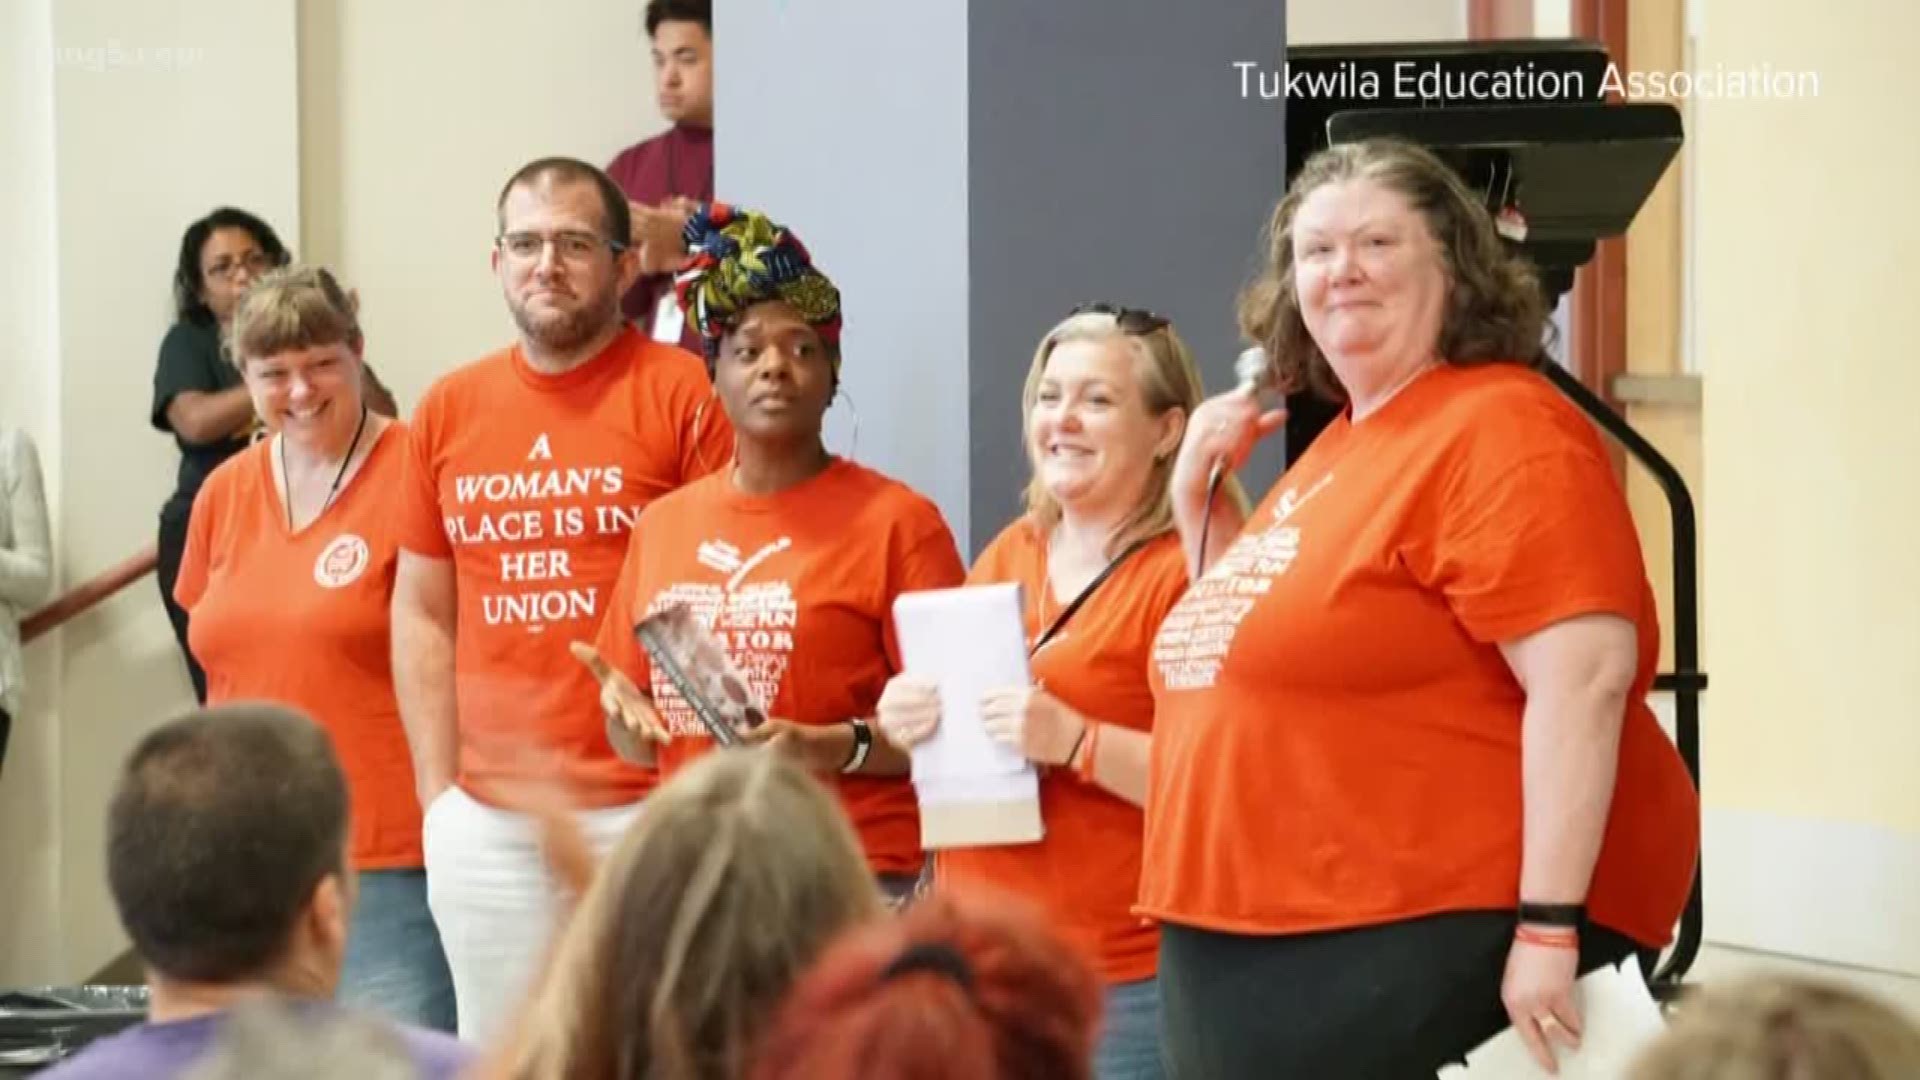 Thousands of students in Tukwila will start school Wednesday, but classrooms could be empty by Monday morning. Teachers voted to strike Friday if they cannot come to a contract agreement with the school district.